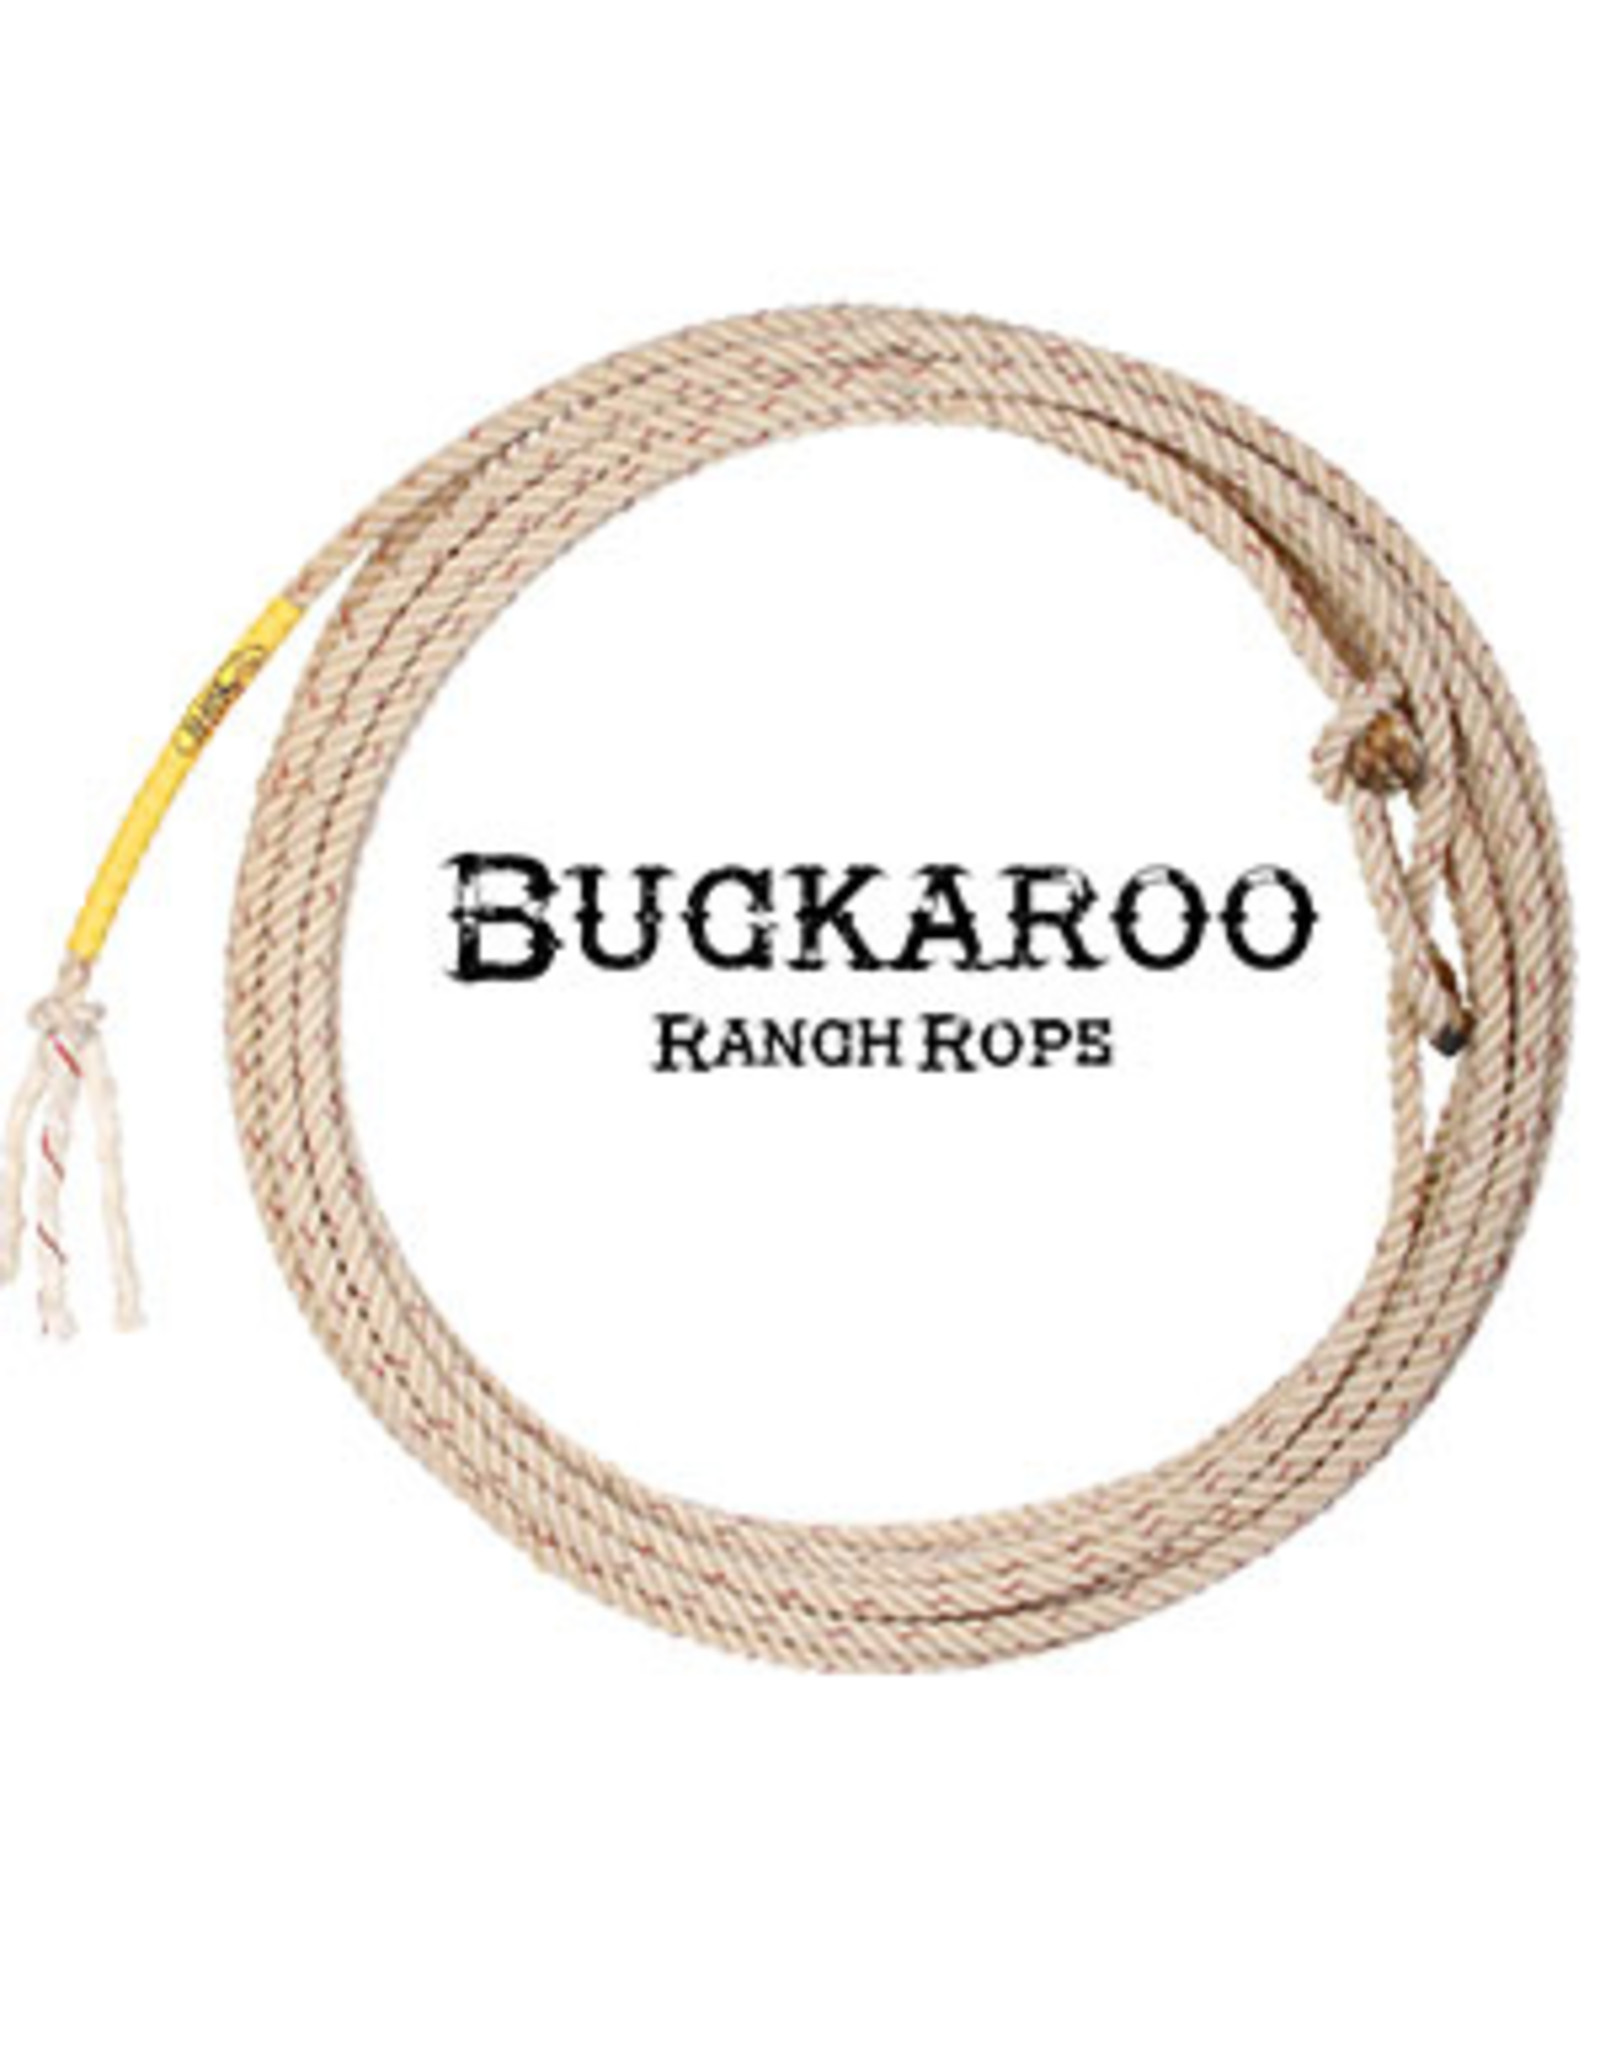 Cactus Ropes Cactus Buckaroo 60 foot 3/8 Scant - Soft - CR38SCANT60